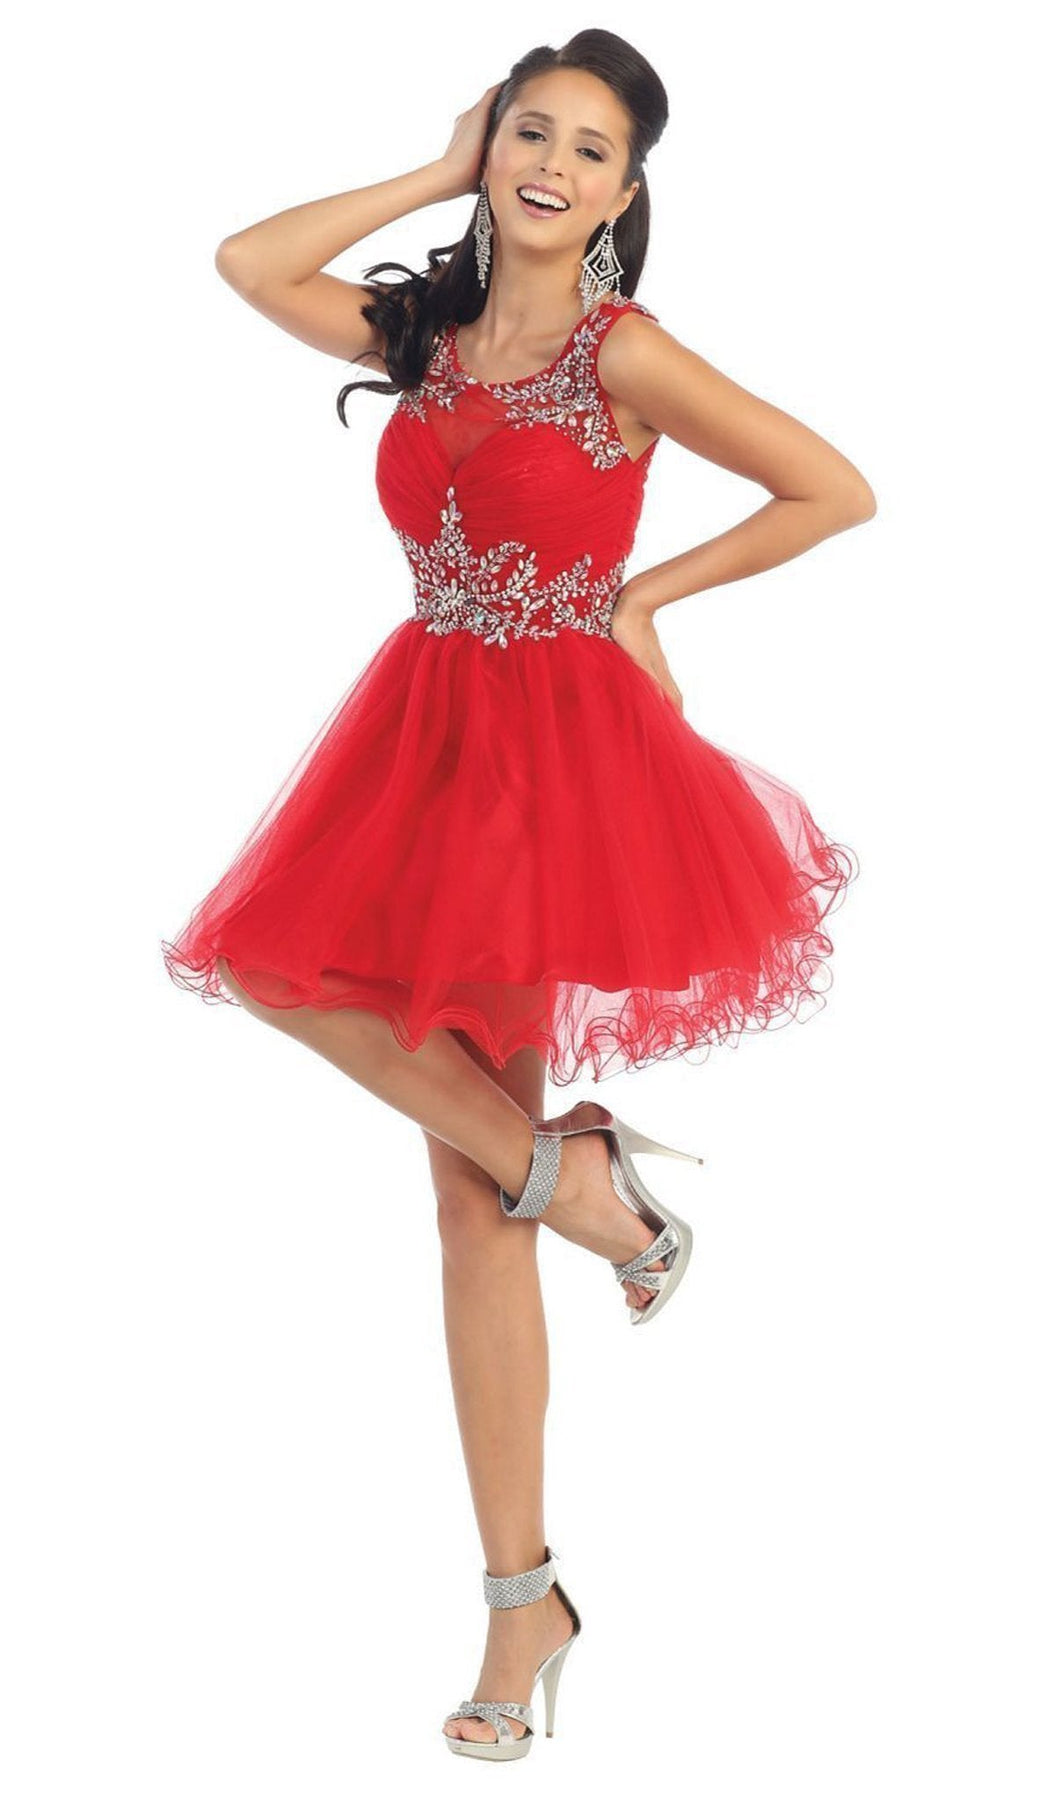 May Queen - Stunning Beaded Illusion Neck Cocktail Dress Special Occasion Dress 4 / Red